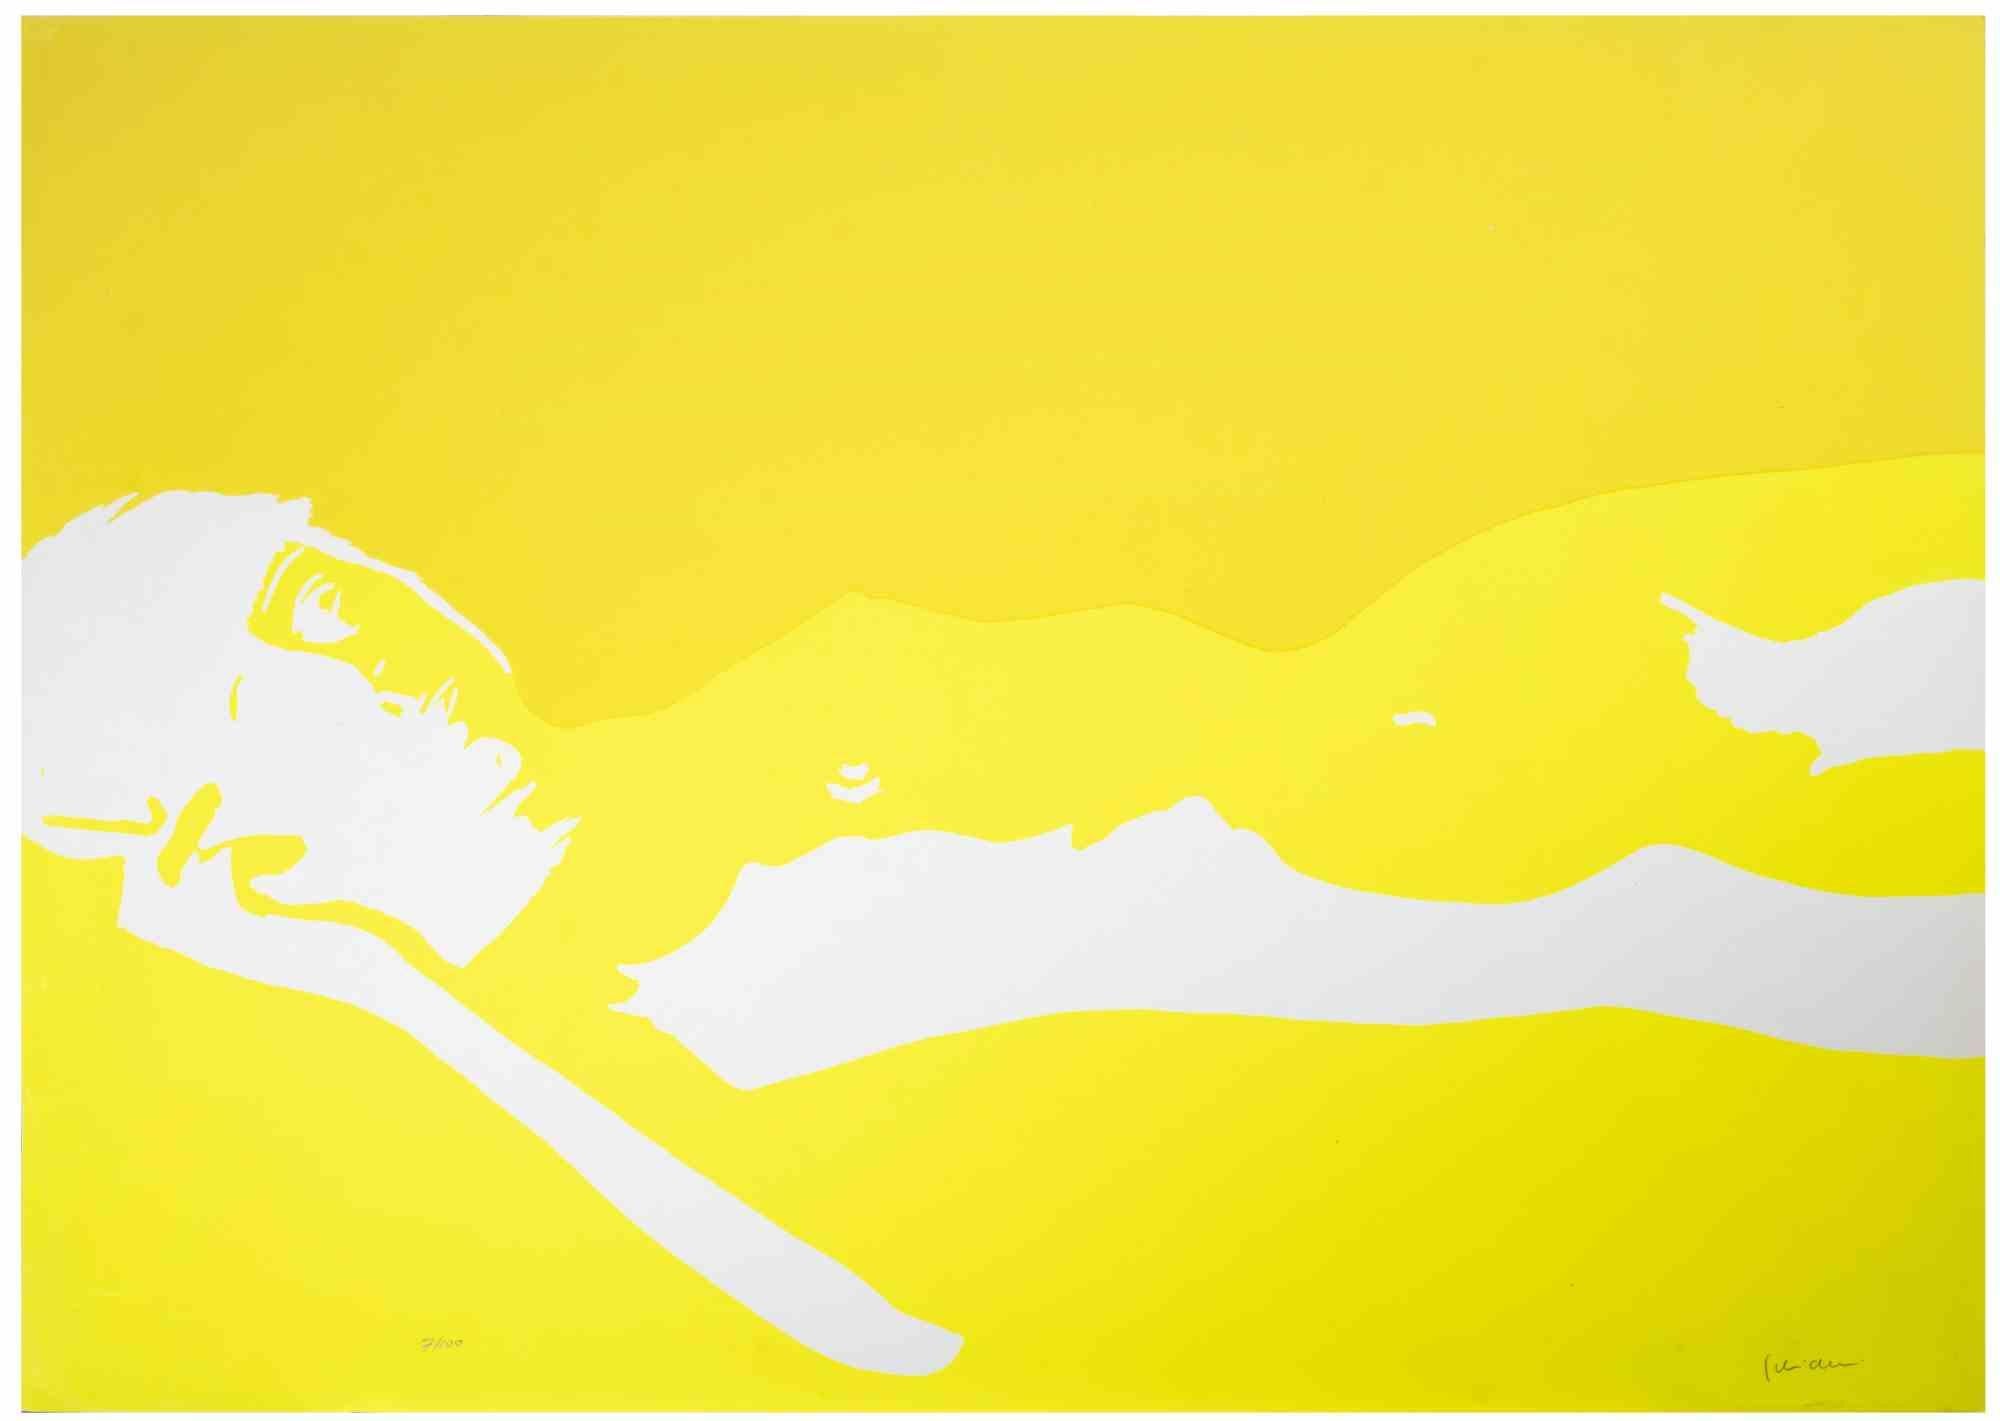 Unknown Abstract Print - Figure in Yellow - Screenprint - 1970s